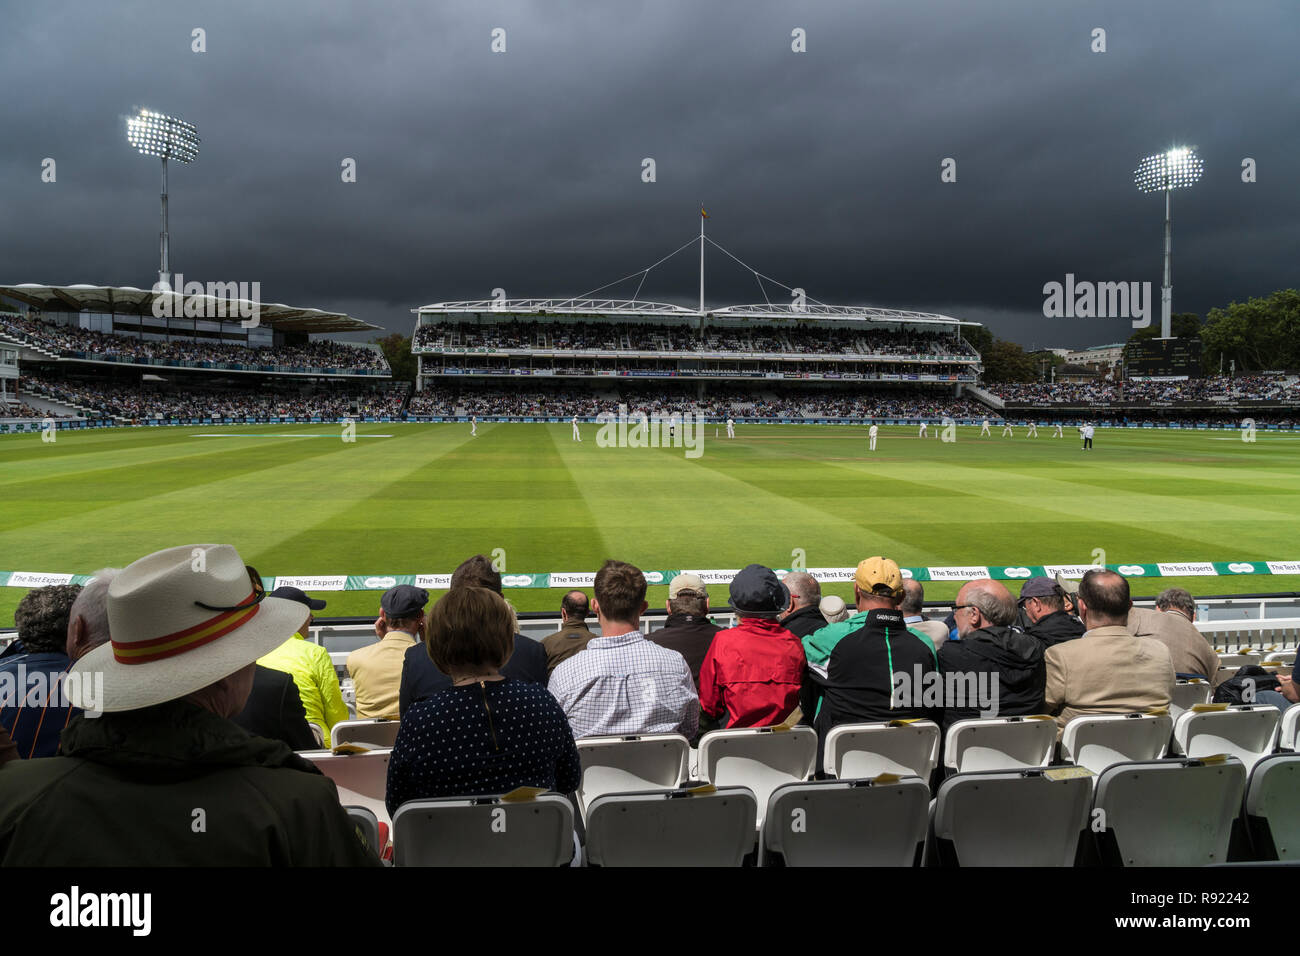 Under a threatening storm sky the 2018 test between England and India. The pitch is in bright sunshine but heavy rain is on its way Stock Photo